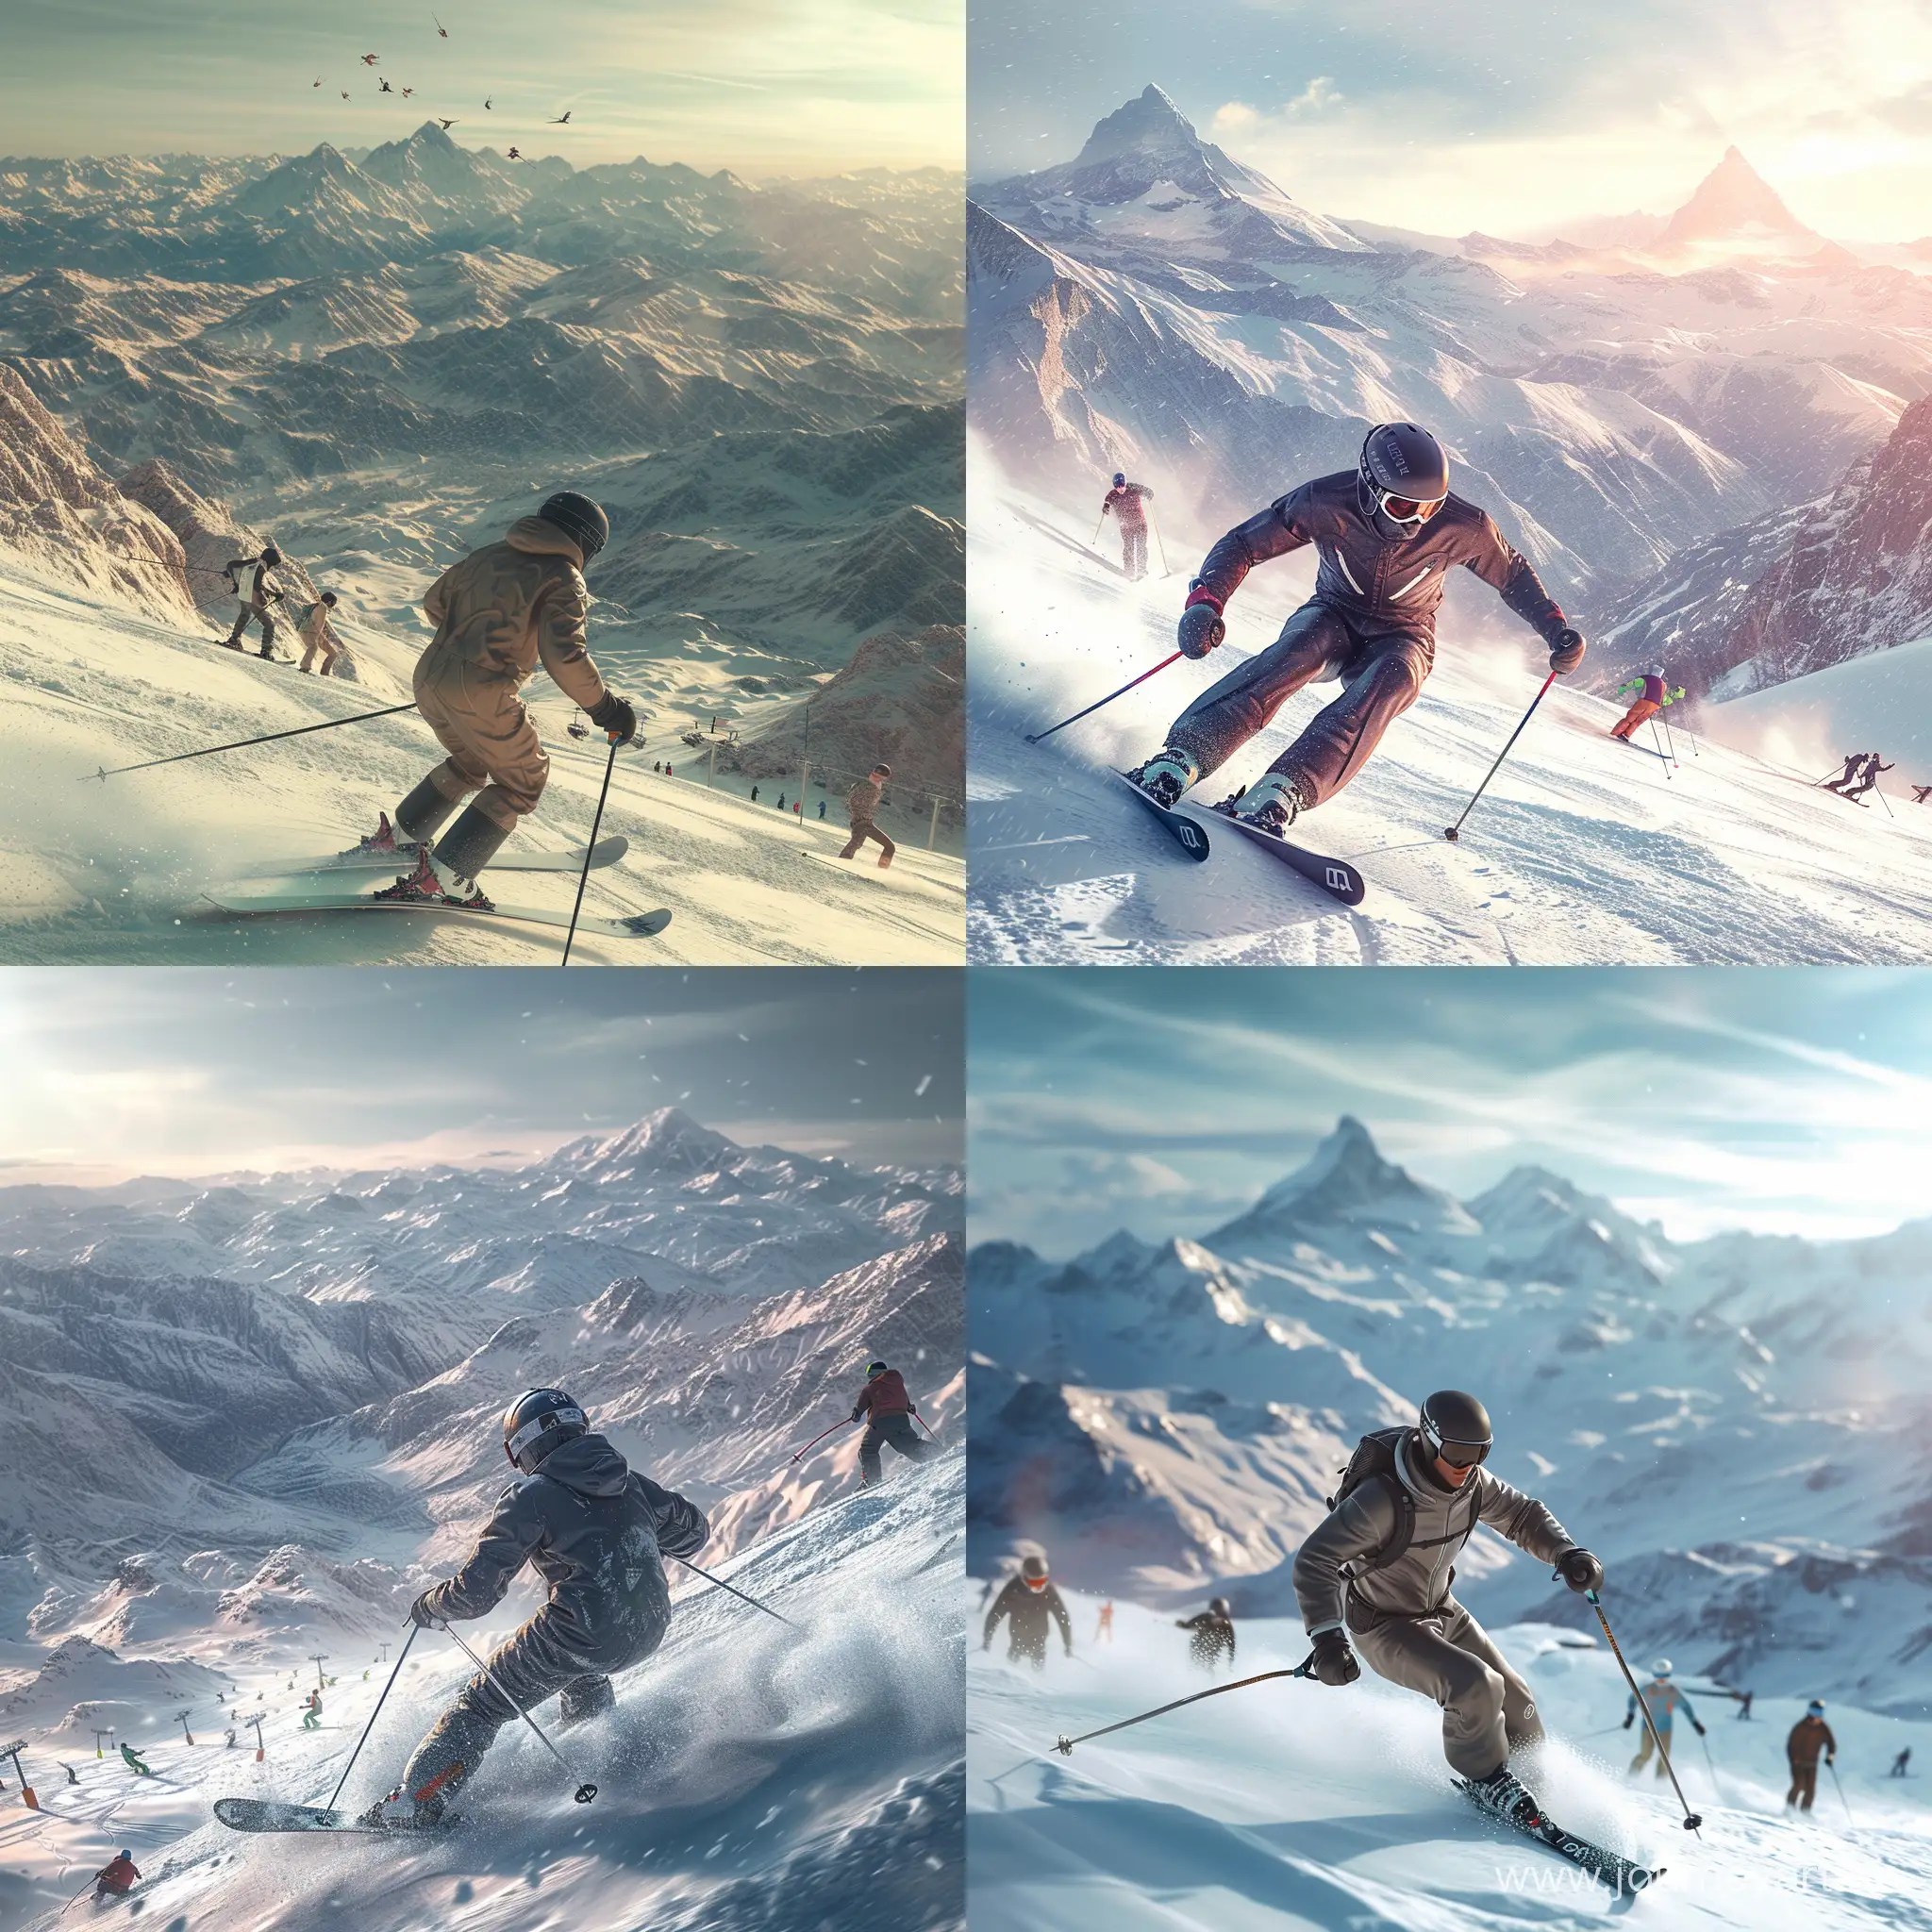 RAW photography, full frame, warmth, man in a ski suit rushes down the mountain on downhill skis, skiers and snowboarders are around, snow-capped mountains in the distance on the horizon, voluminous light, aesthetic, masterpiece, realistic rendering, high detail ,deep rendering of the background, hyperrealistic, photorealistic